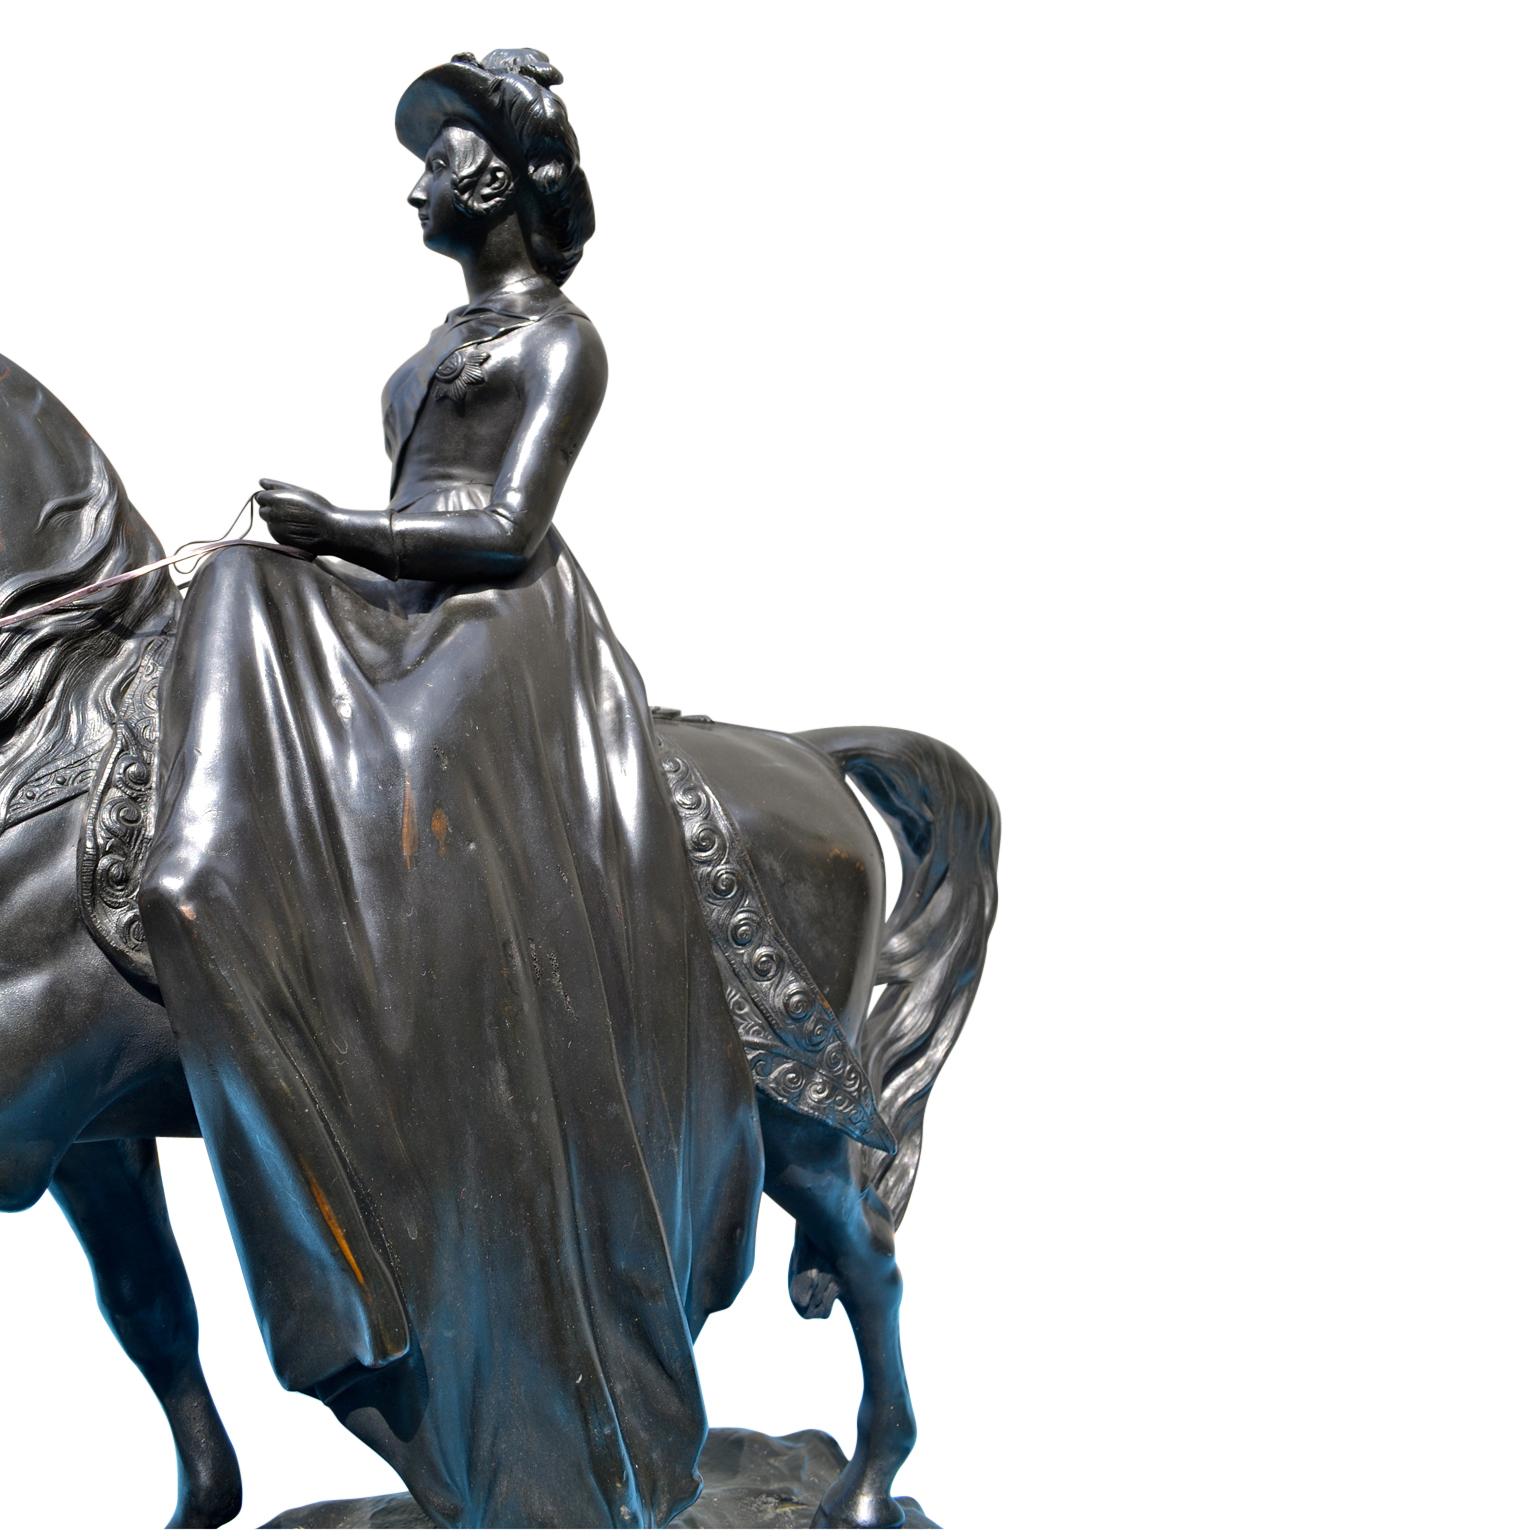 English 19th Century Equestrian Bronze Statue of the Young Queen Victoria on Horseback